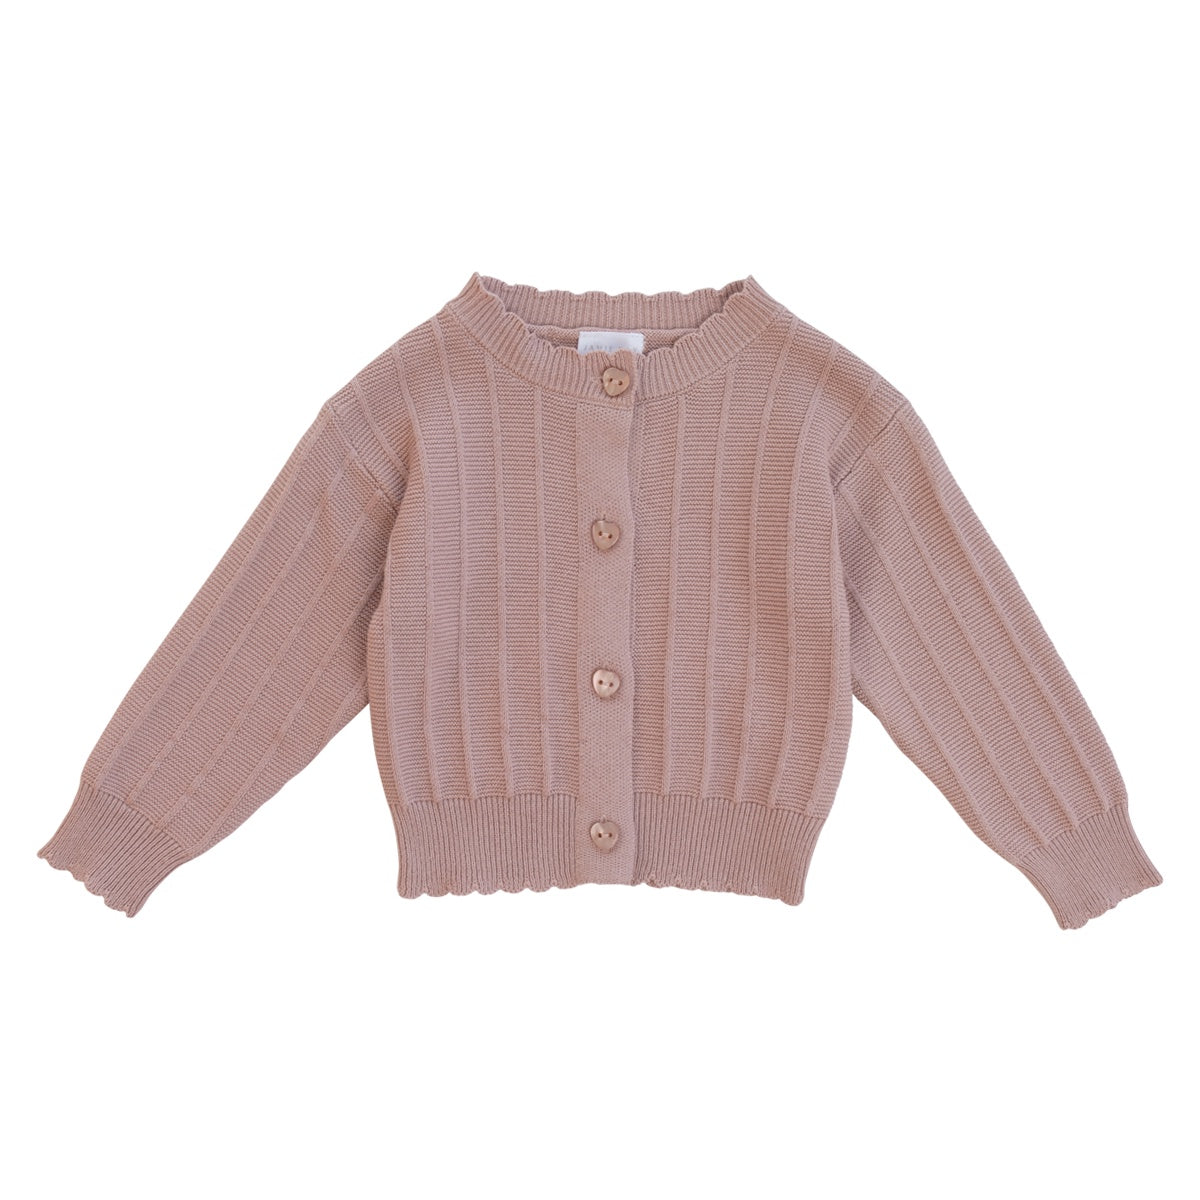 Emily Knitted Cardigan - Petal